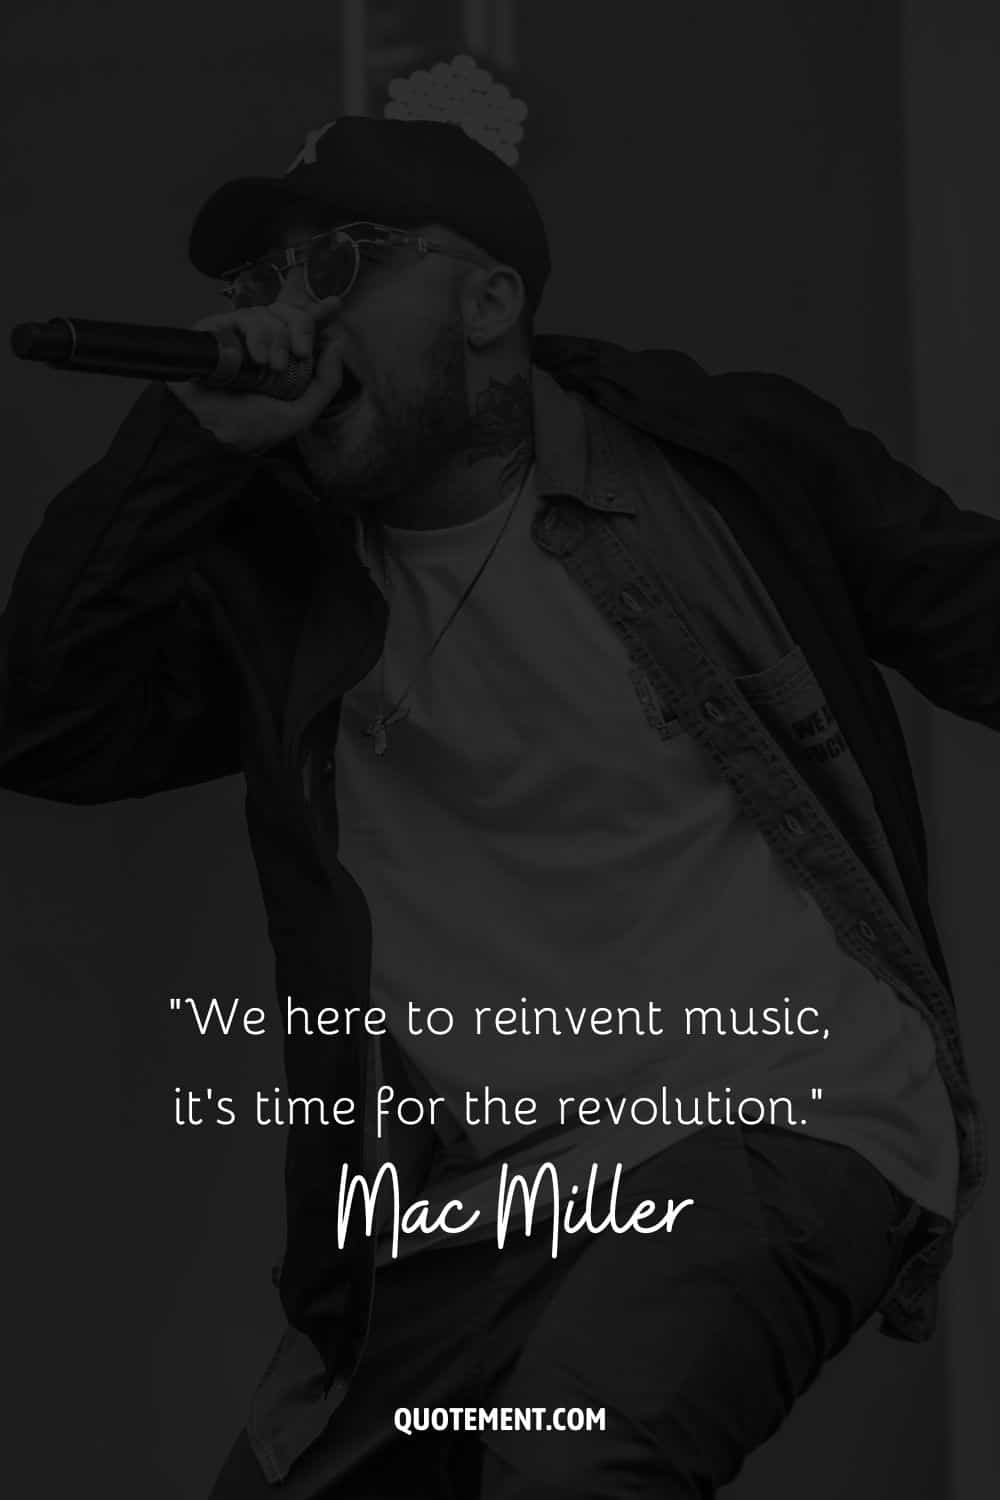 “We here to reinvent music, it's time for the revolution.” – Mac Miller